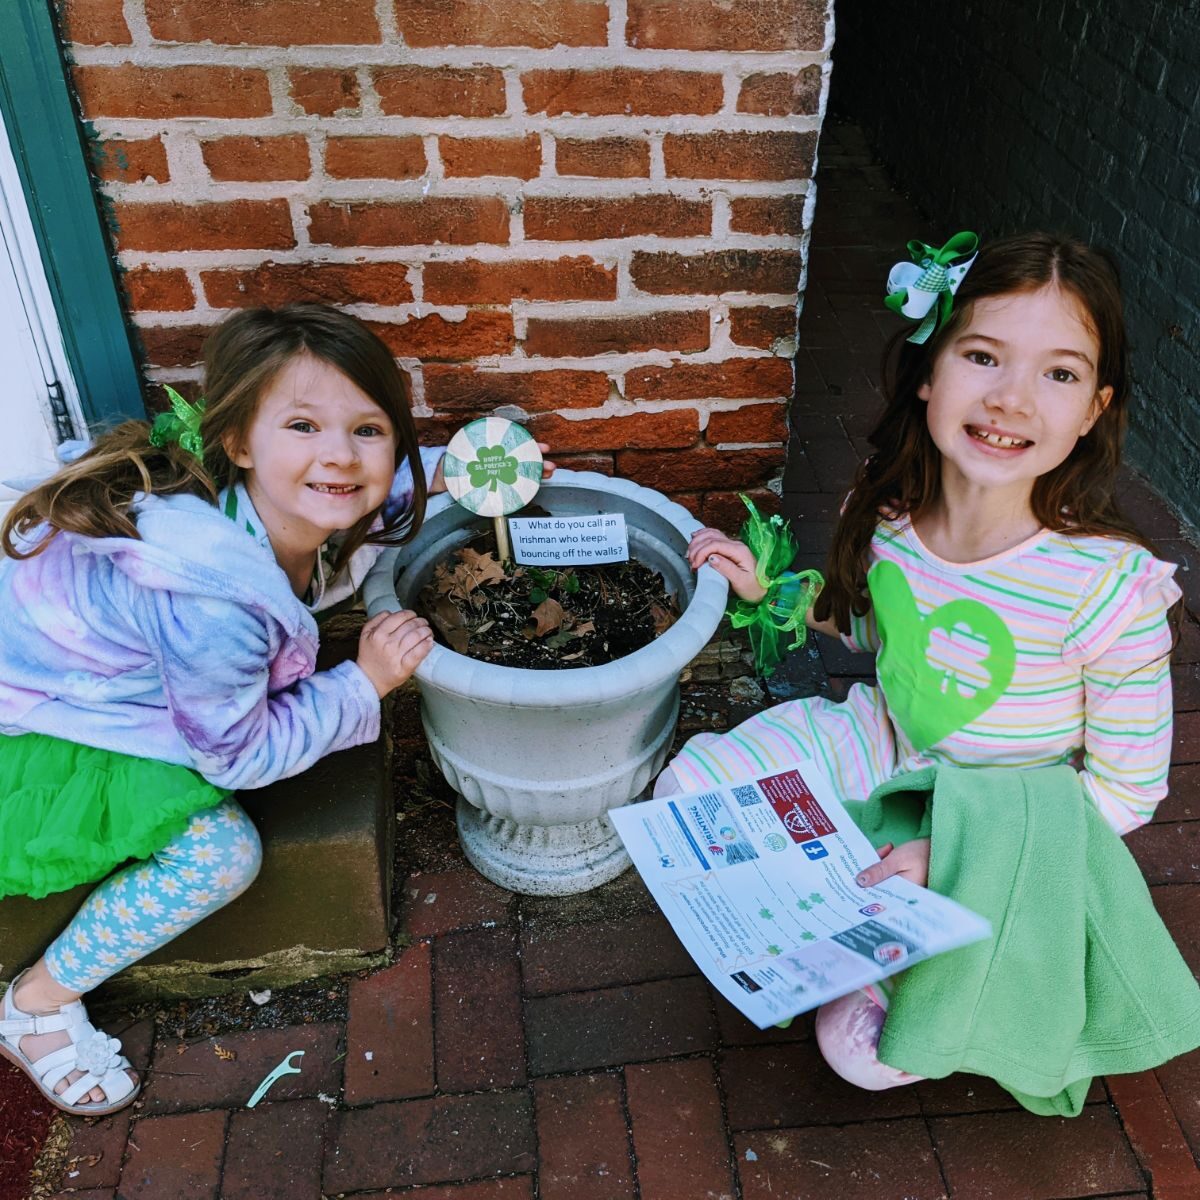 Daughters finding clues on a leprechaun hunt near a planter with a plant stake